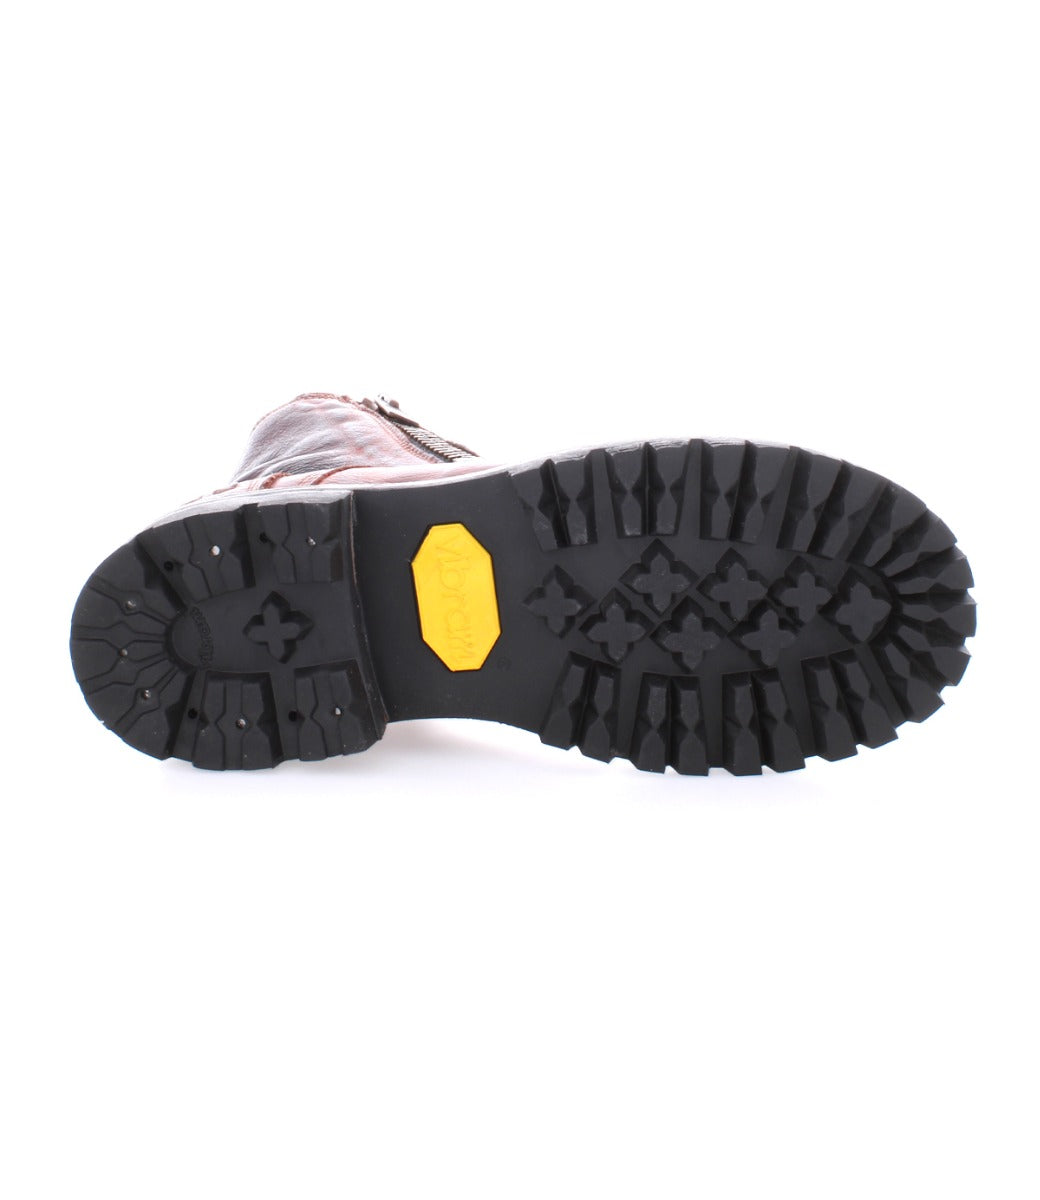 A pair of Tactic Trek boots by Bed Stu with yellow soles on a white background.